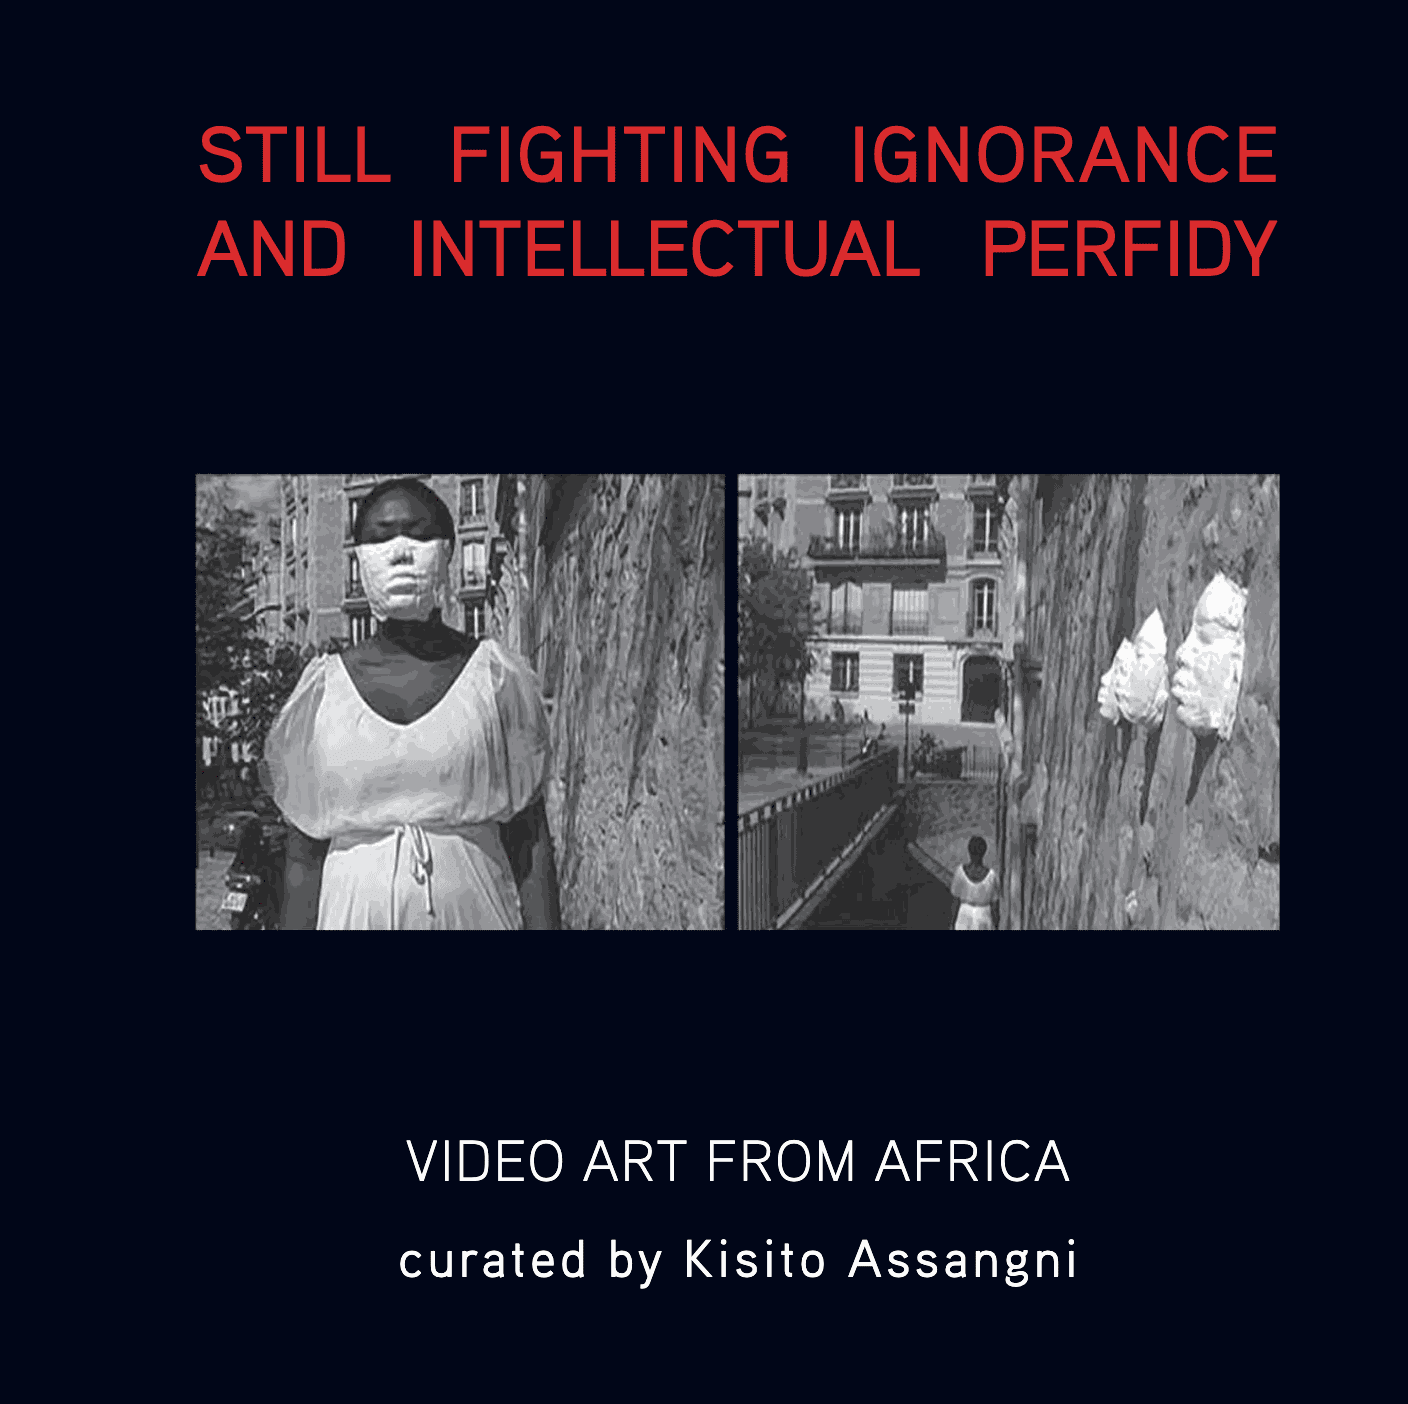 Still Fighting Ignorance: Video Art from Africa Read it here